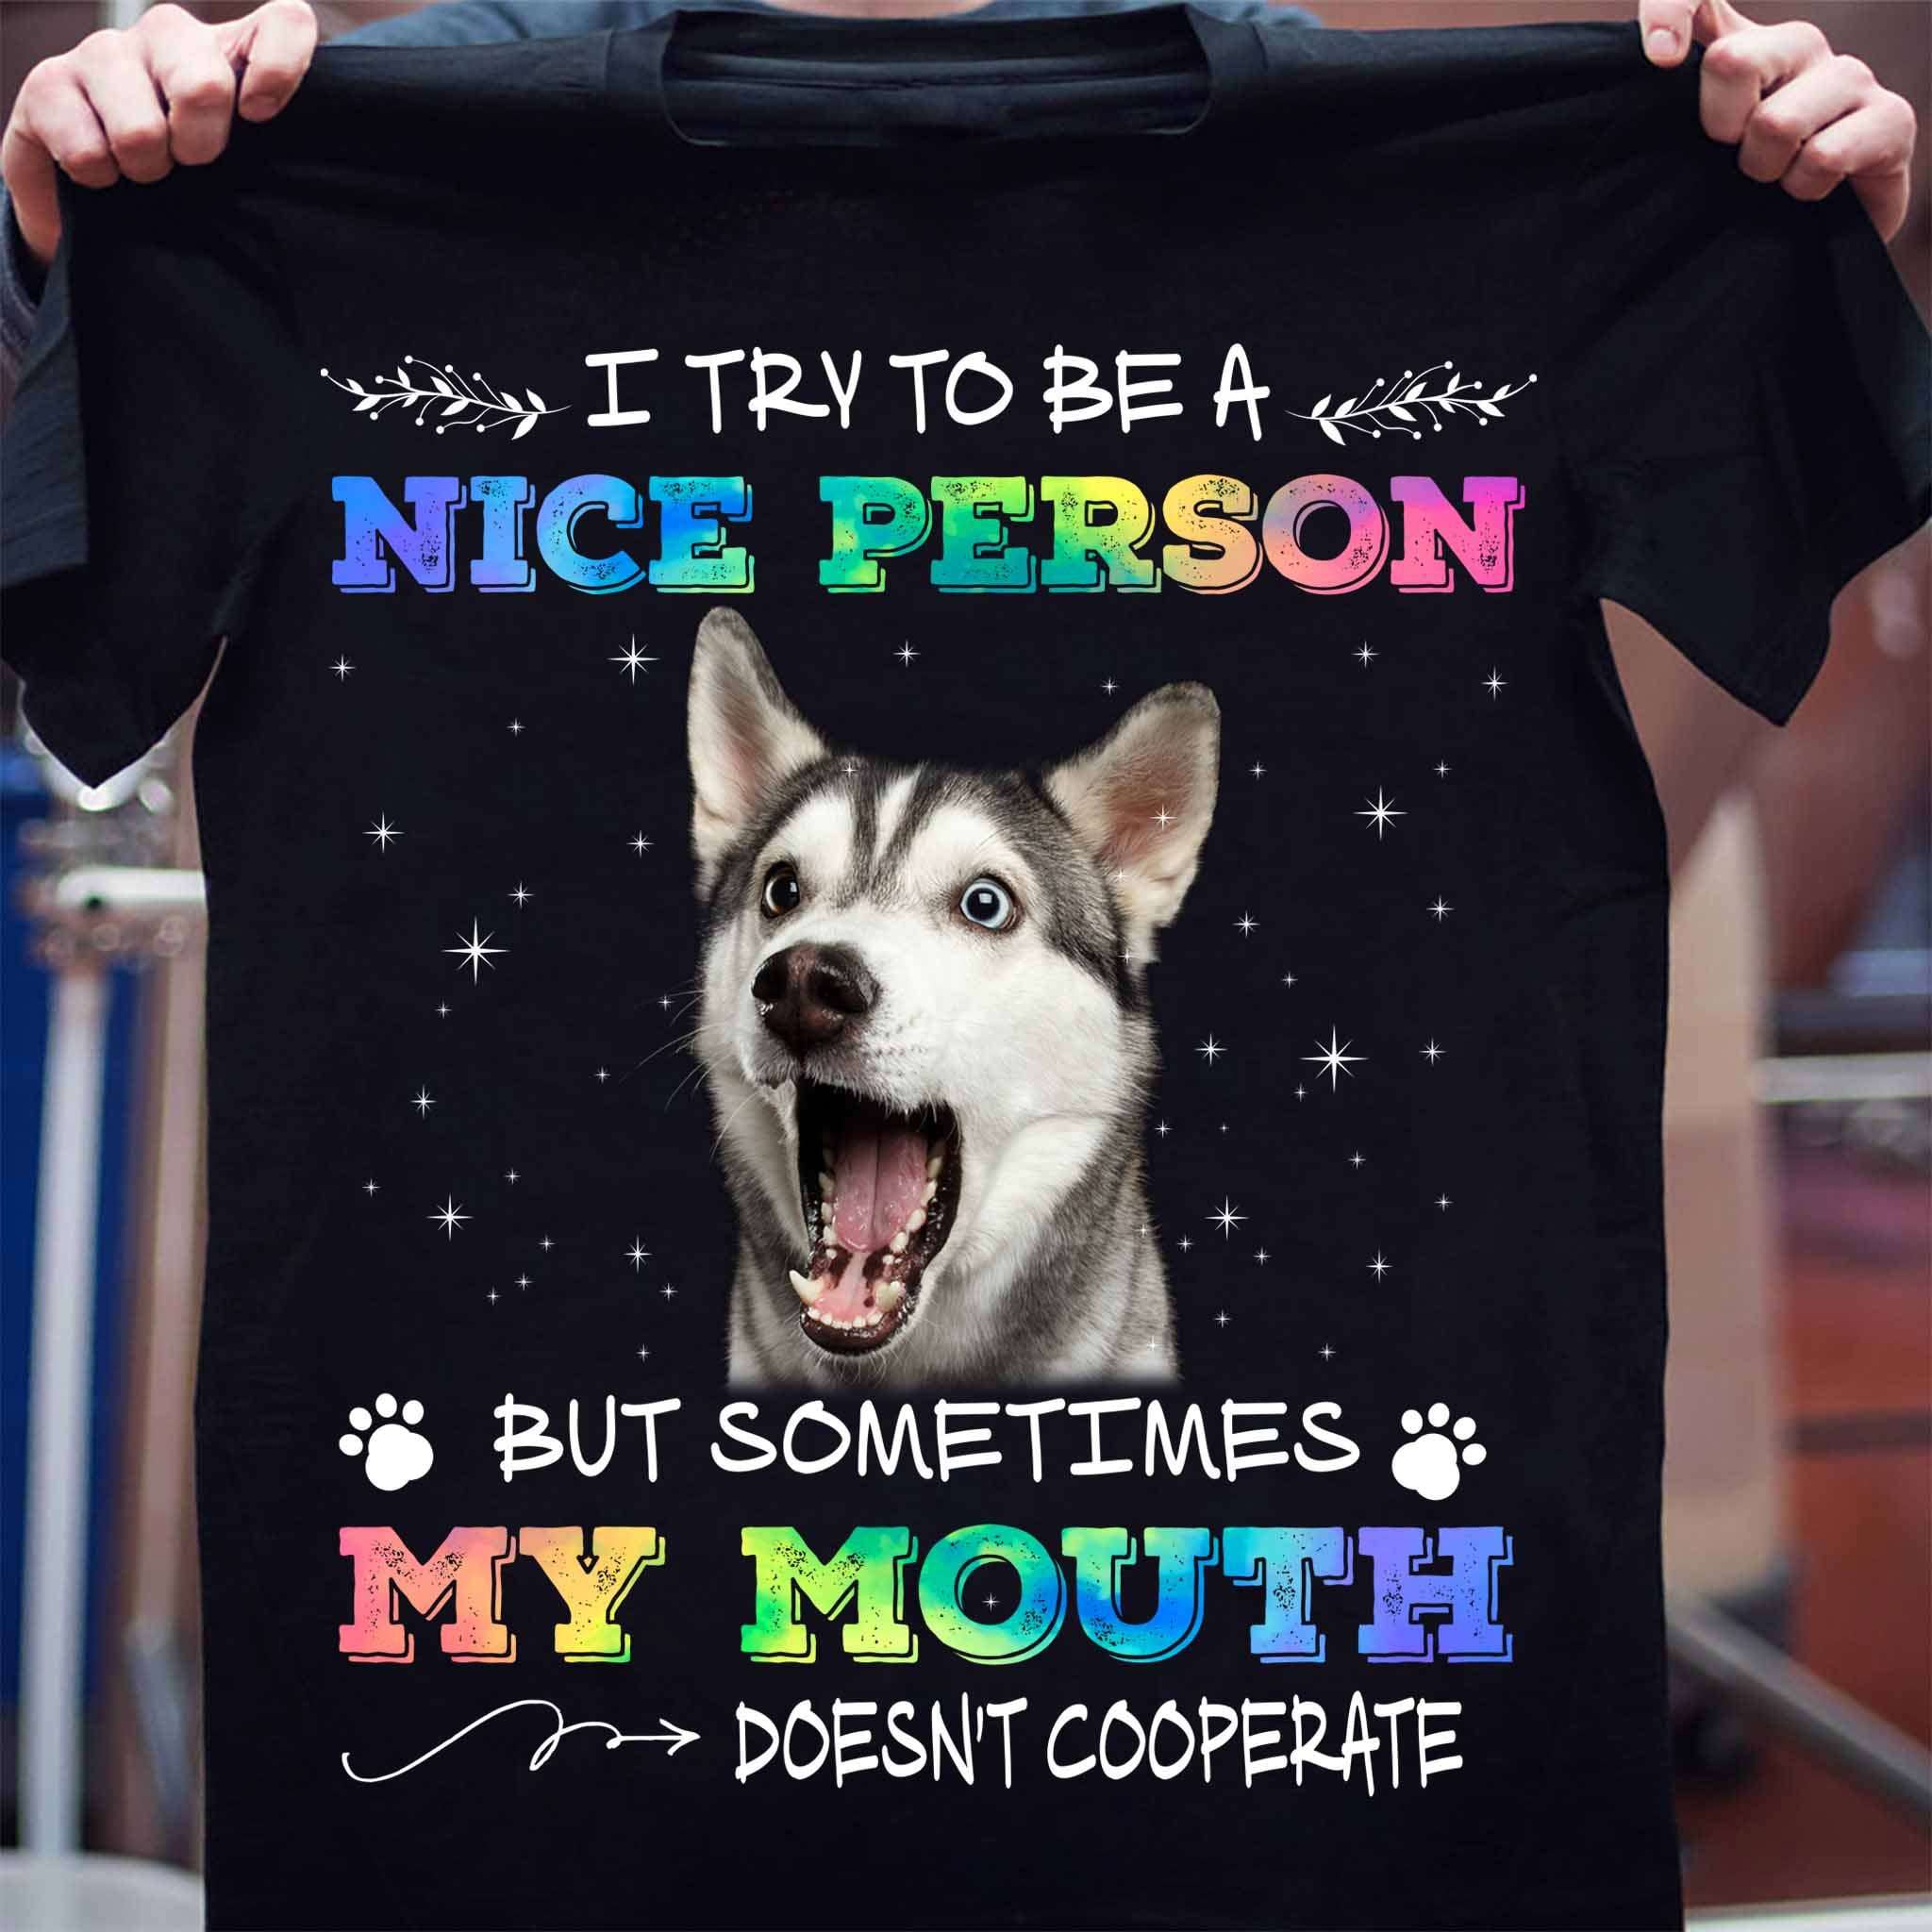 I try to be a nice person but sometimes my mouth doesn't cooperate - Husky dog lover